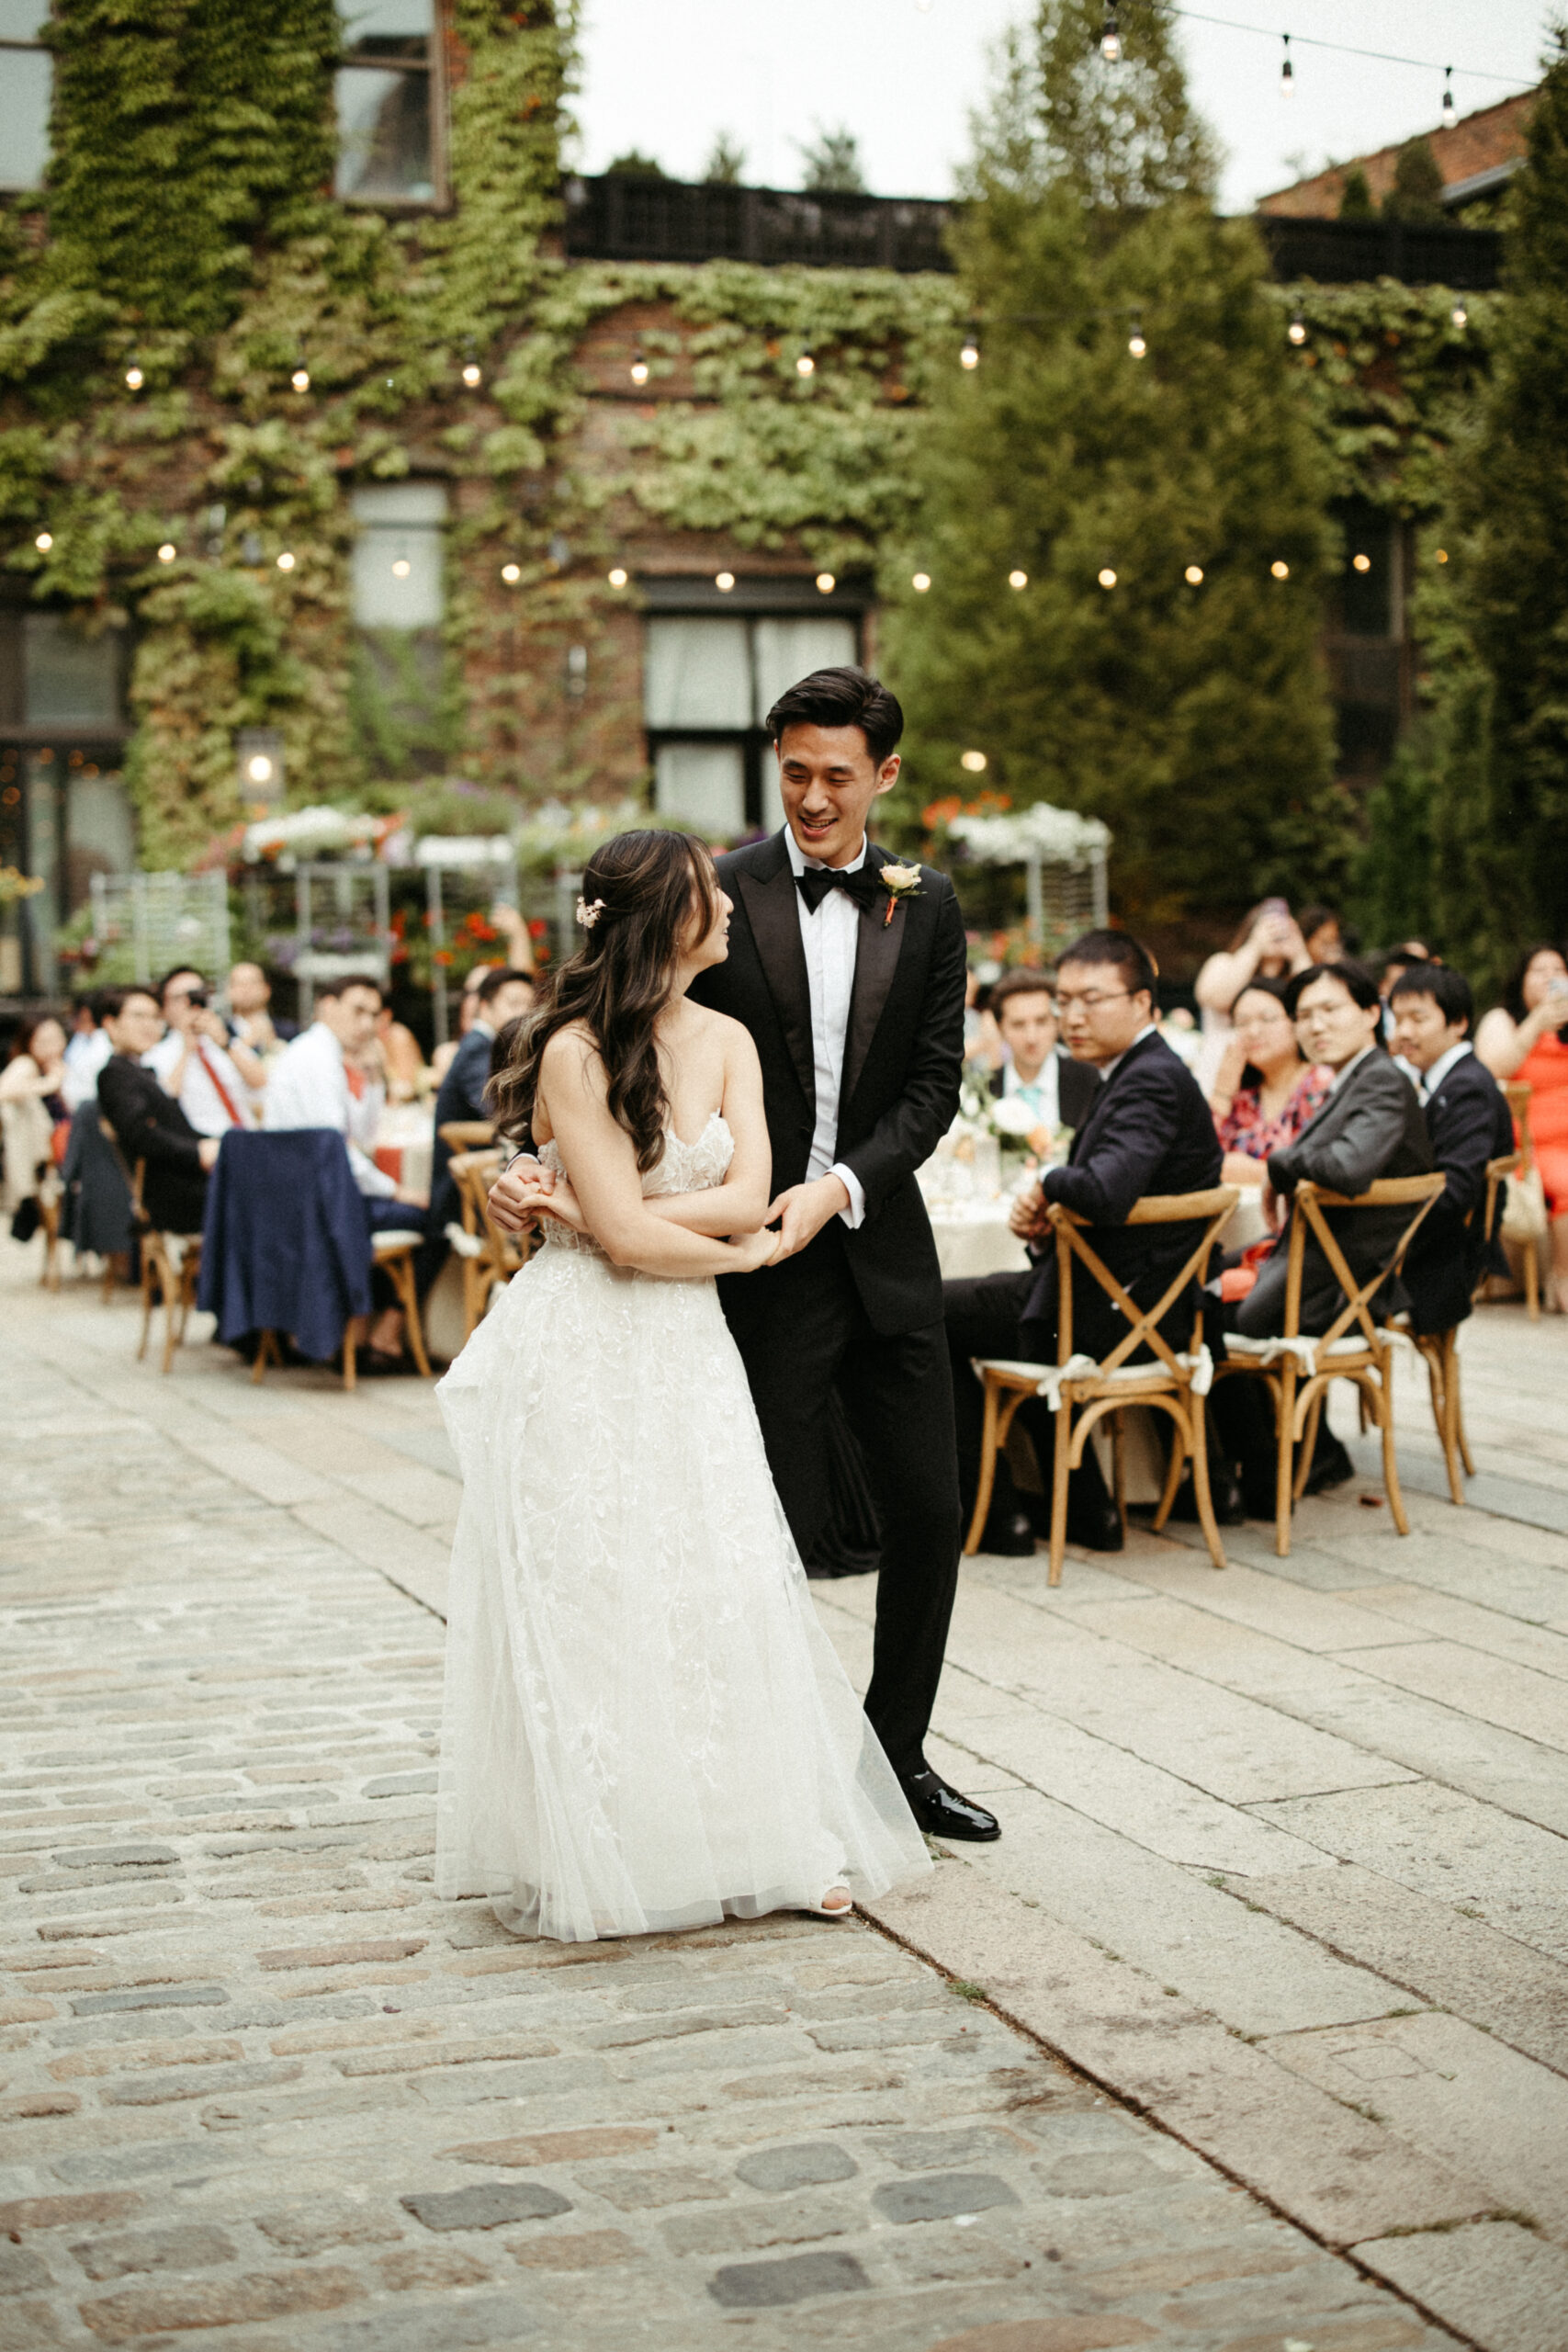 Twinkling lights witness the couple's choreographed first dance—a celebration of shared stories and pure joy at The Foundry LIC Wedding.